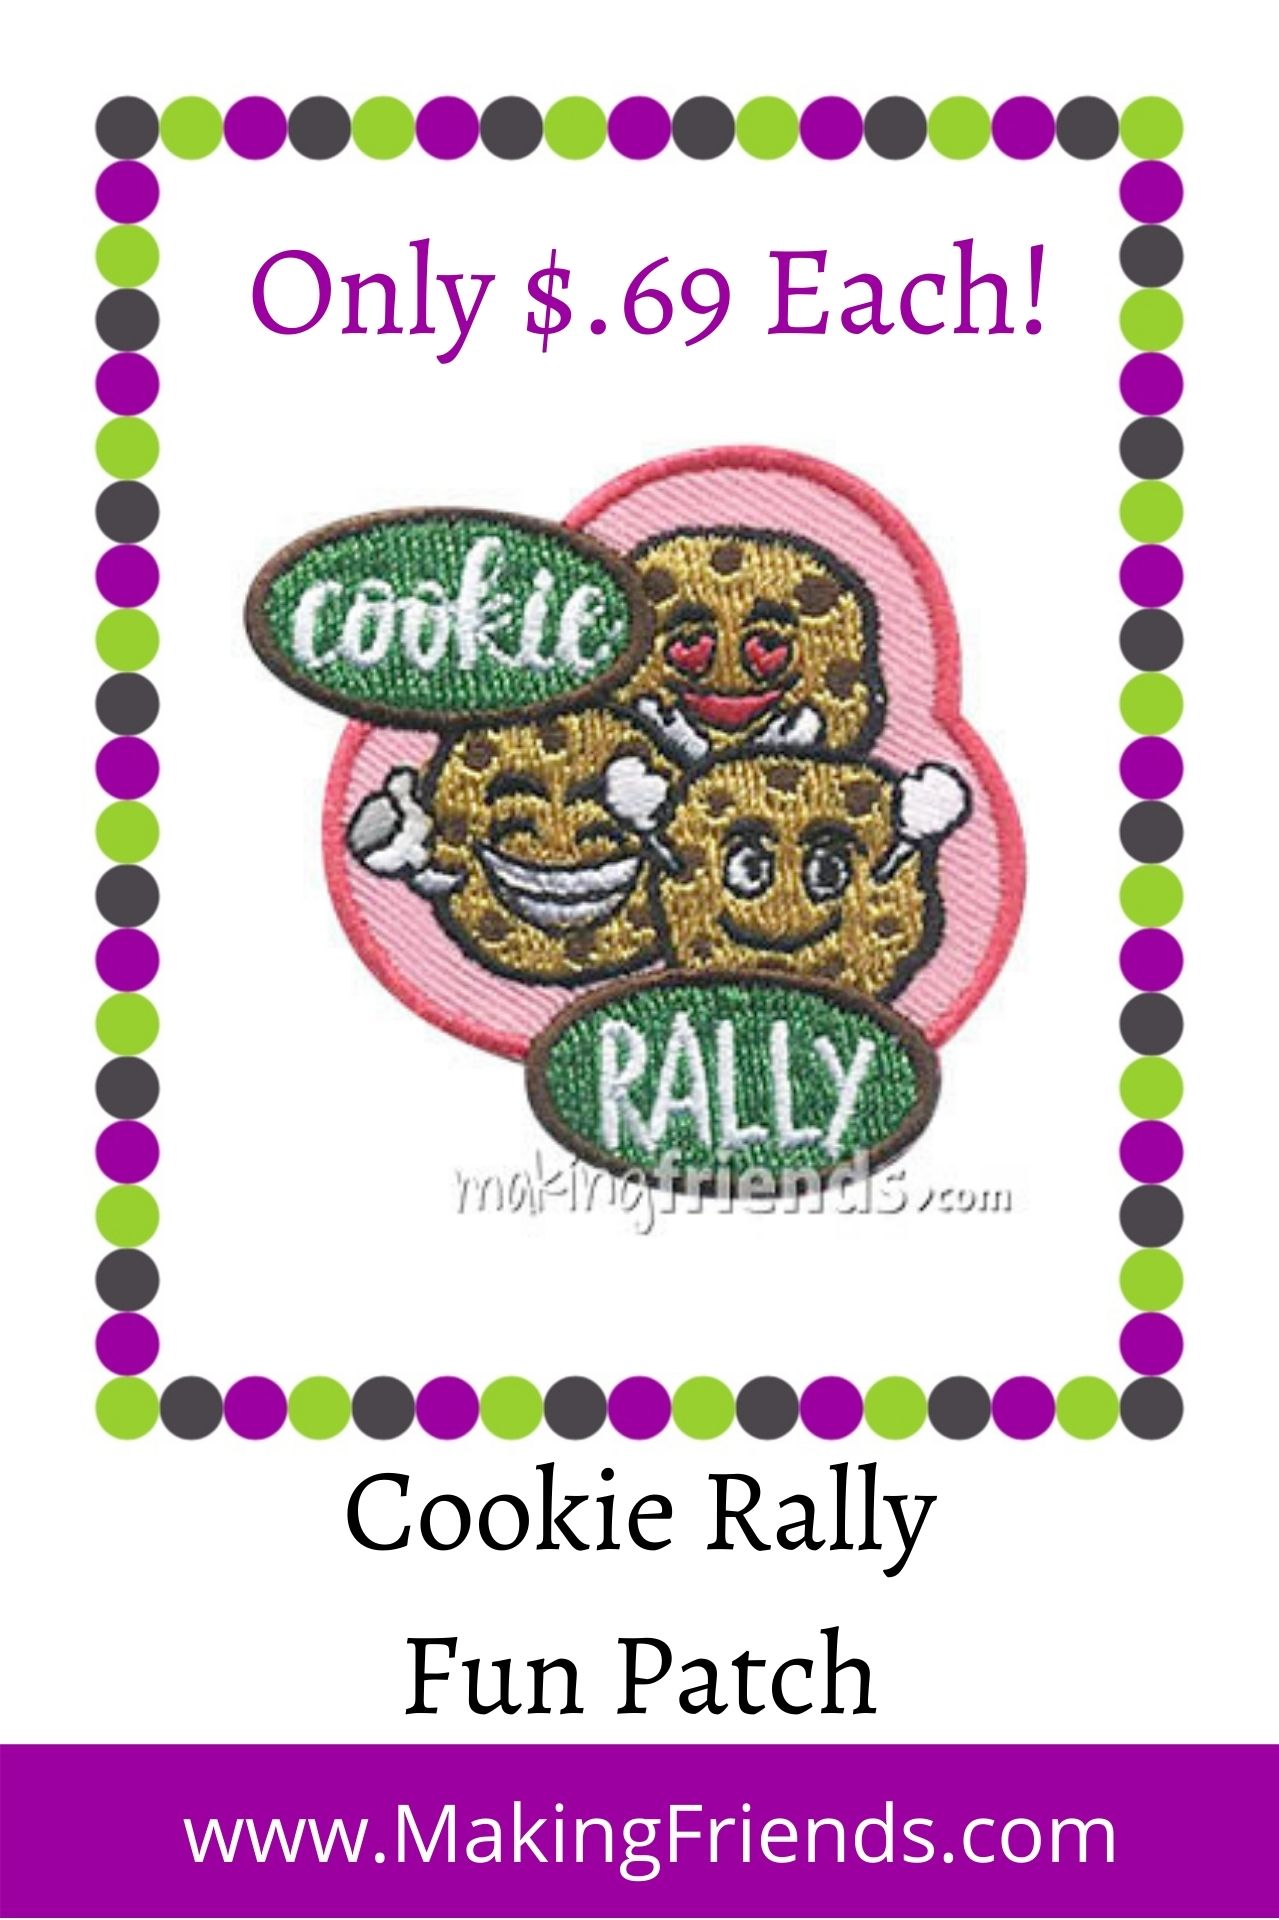 There is no better way to start cookie season than with a cookie rally. Our patch is only $.69 each with free shipping available! #makingfriends #cookierally #girlscoutcookies #cookieseason #gscookies #girlscouts #gsfunpatch #funpatches via @gsleader411